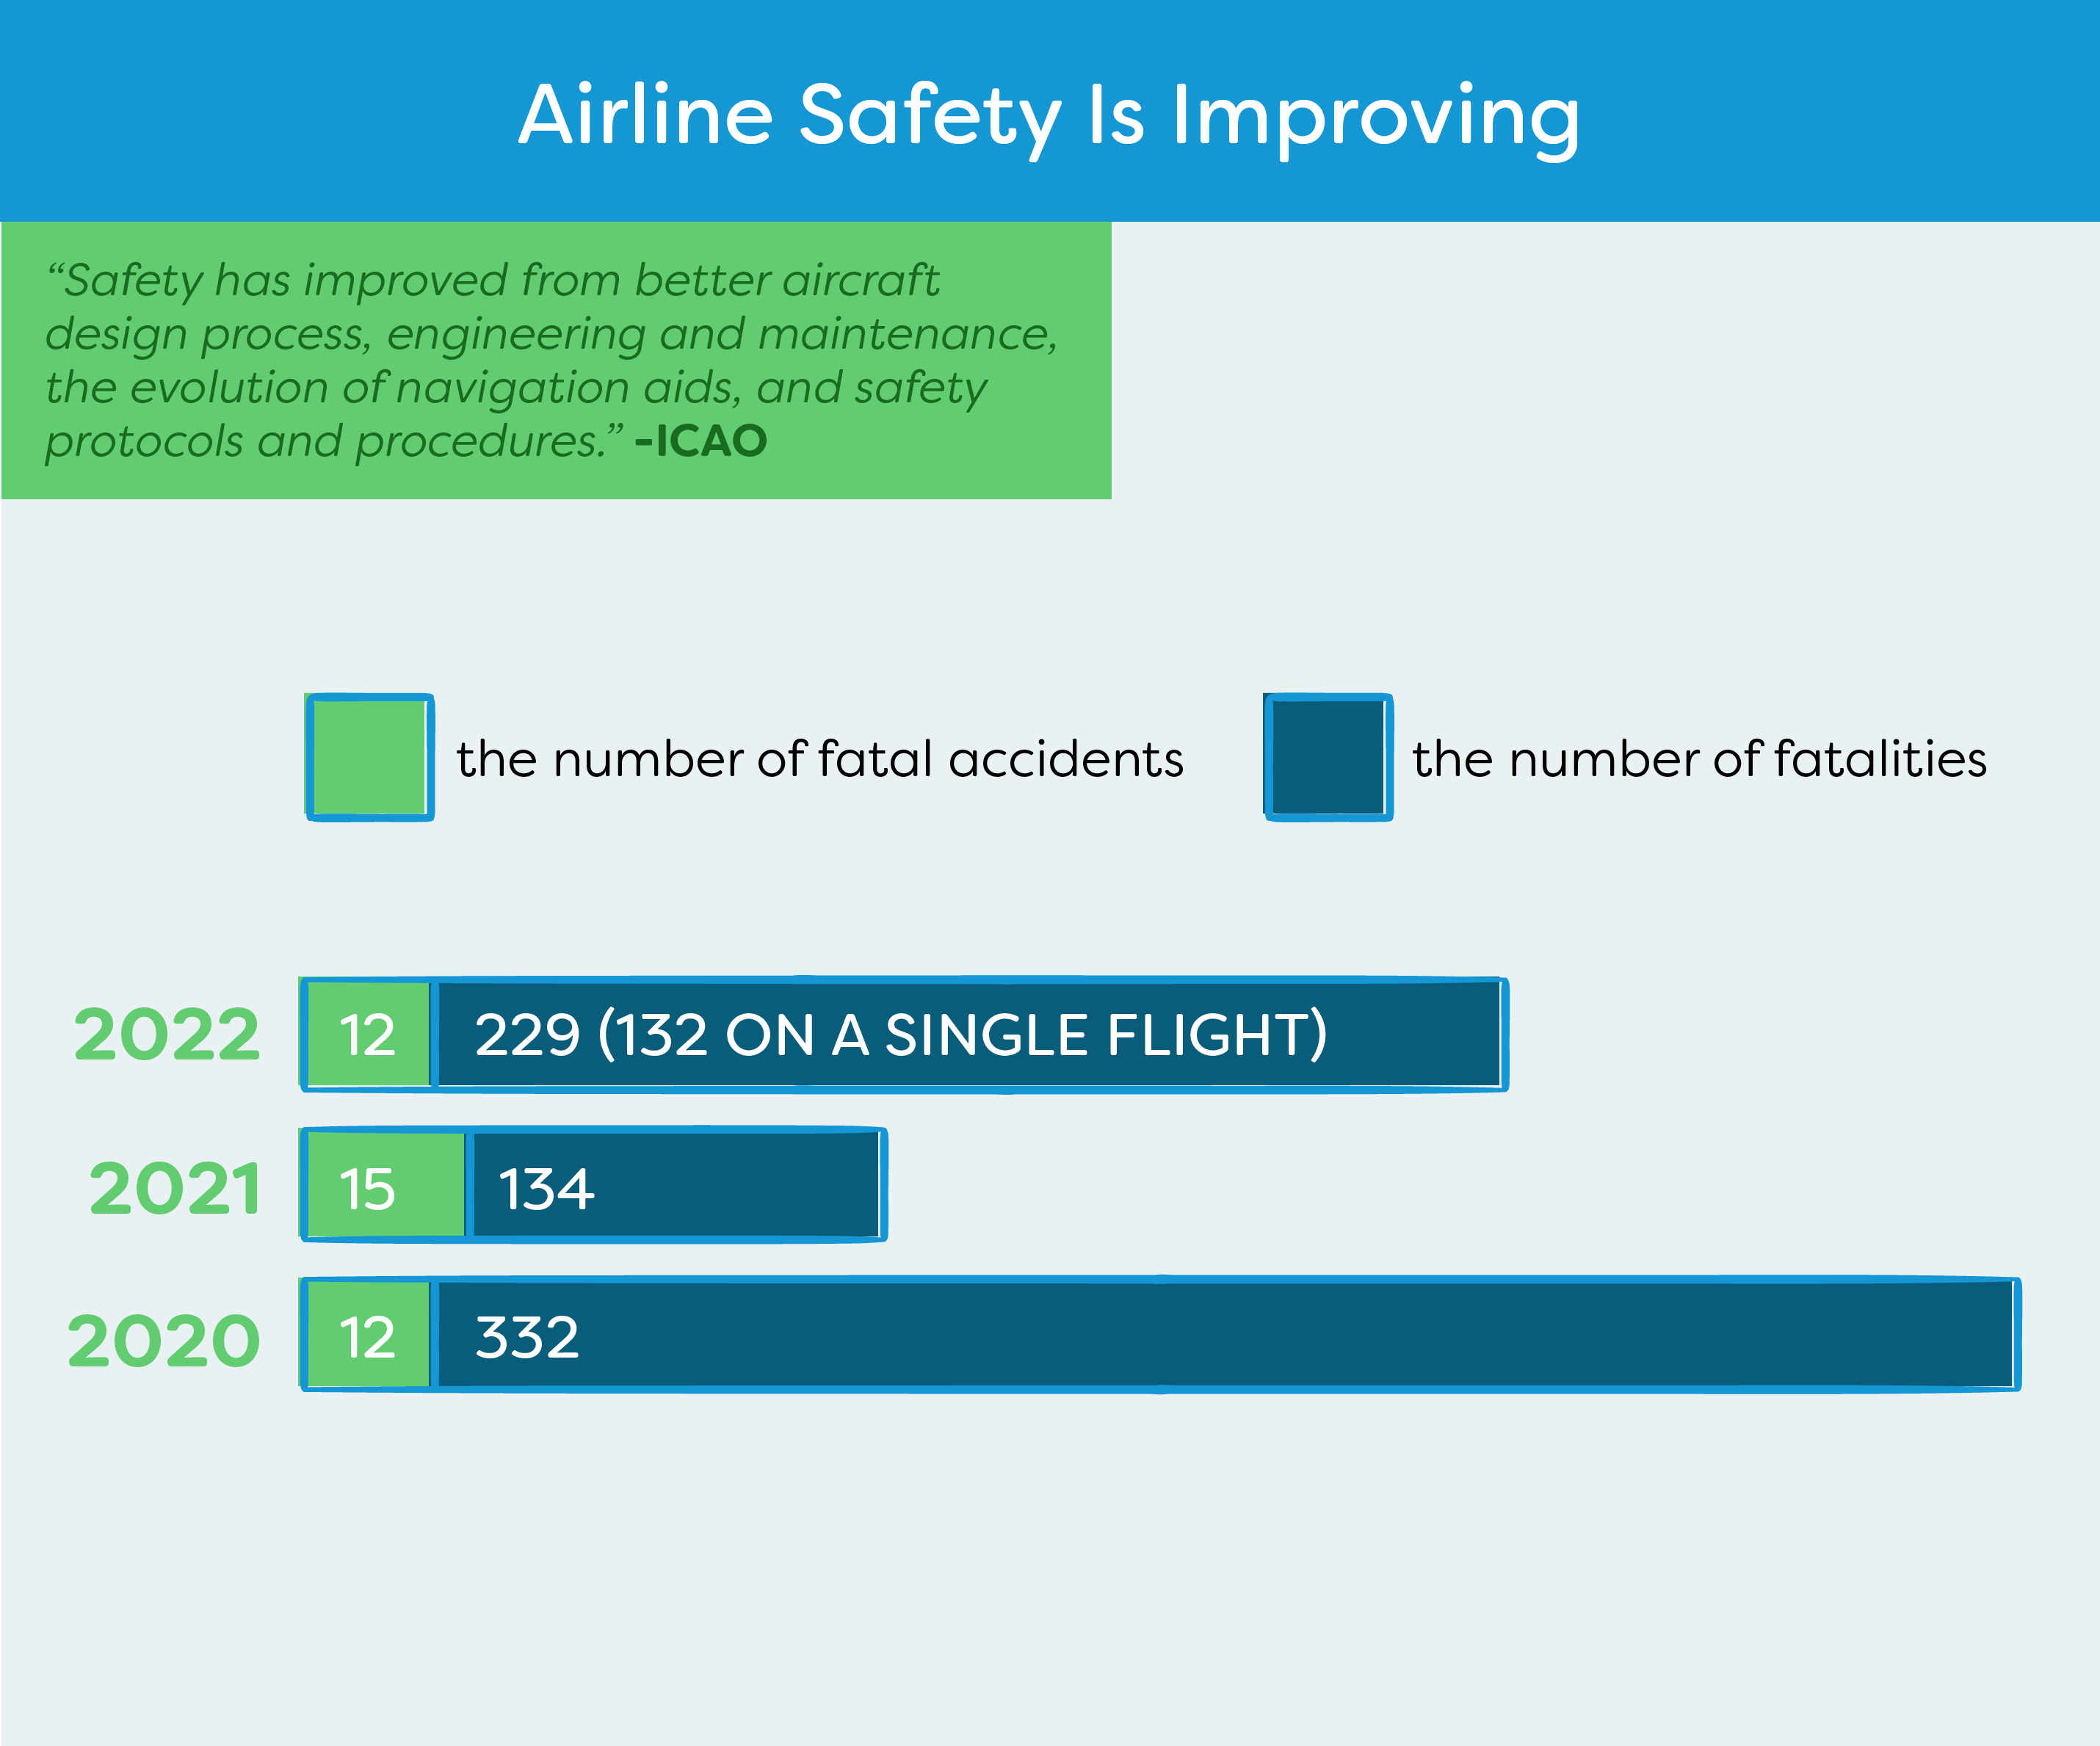 Graphic depicting the total number of aircraft fatalities over the years decreasing in a green and blue bar chart along with a blurb explaining that air travel (flying) is very safe